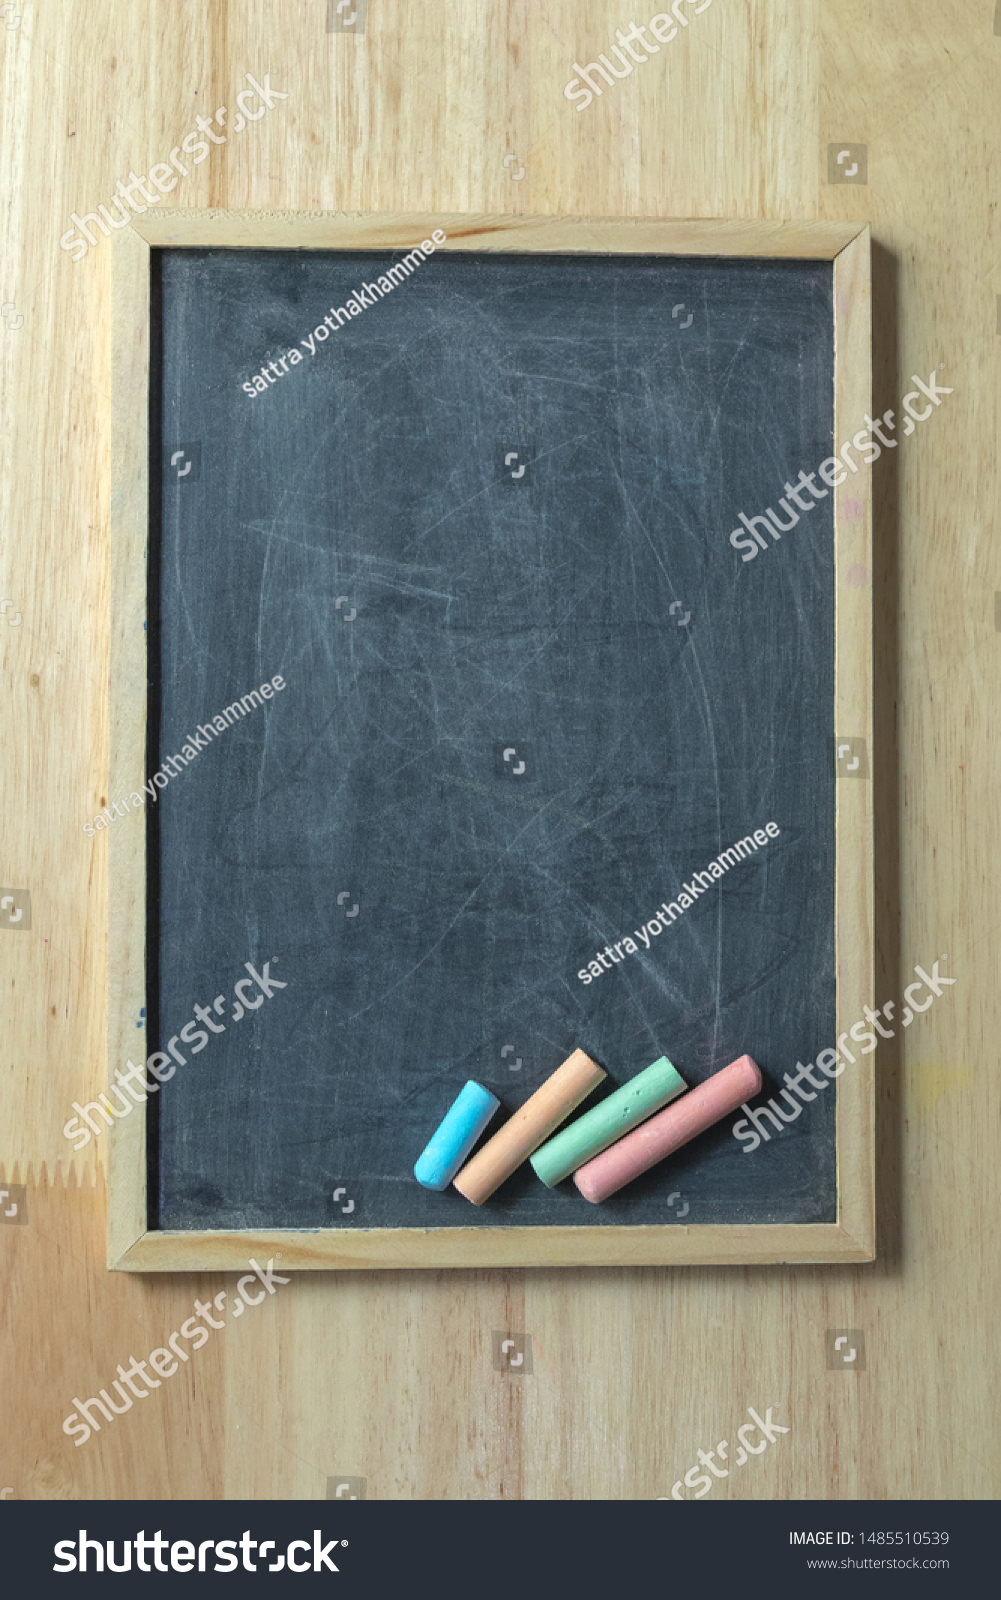 how are chalks made